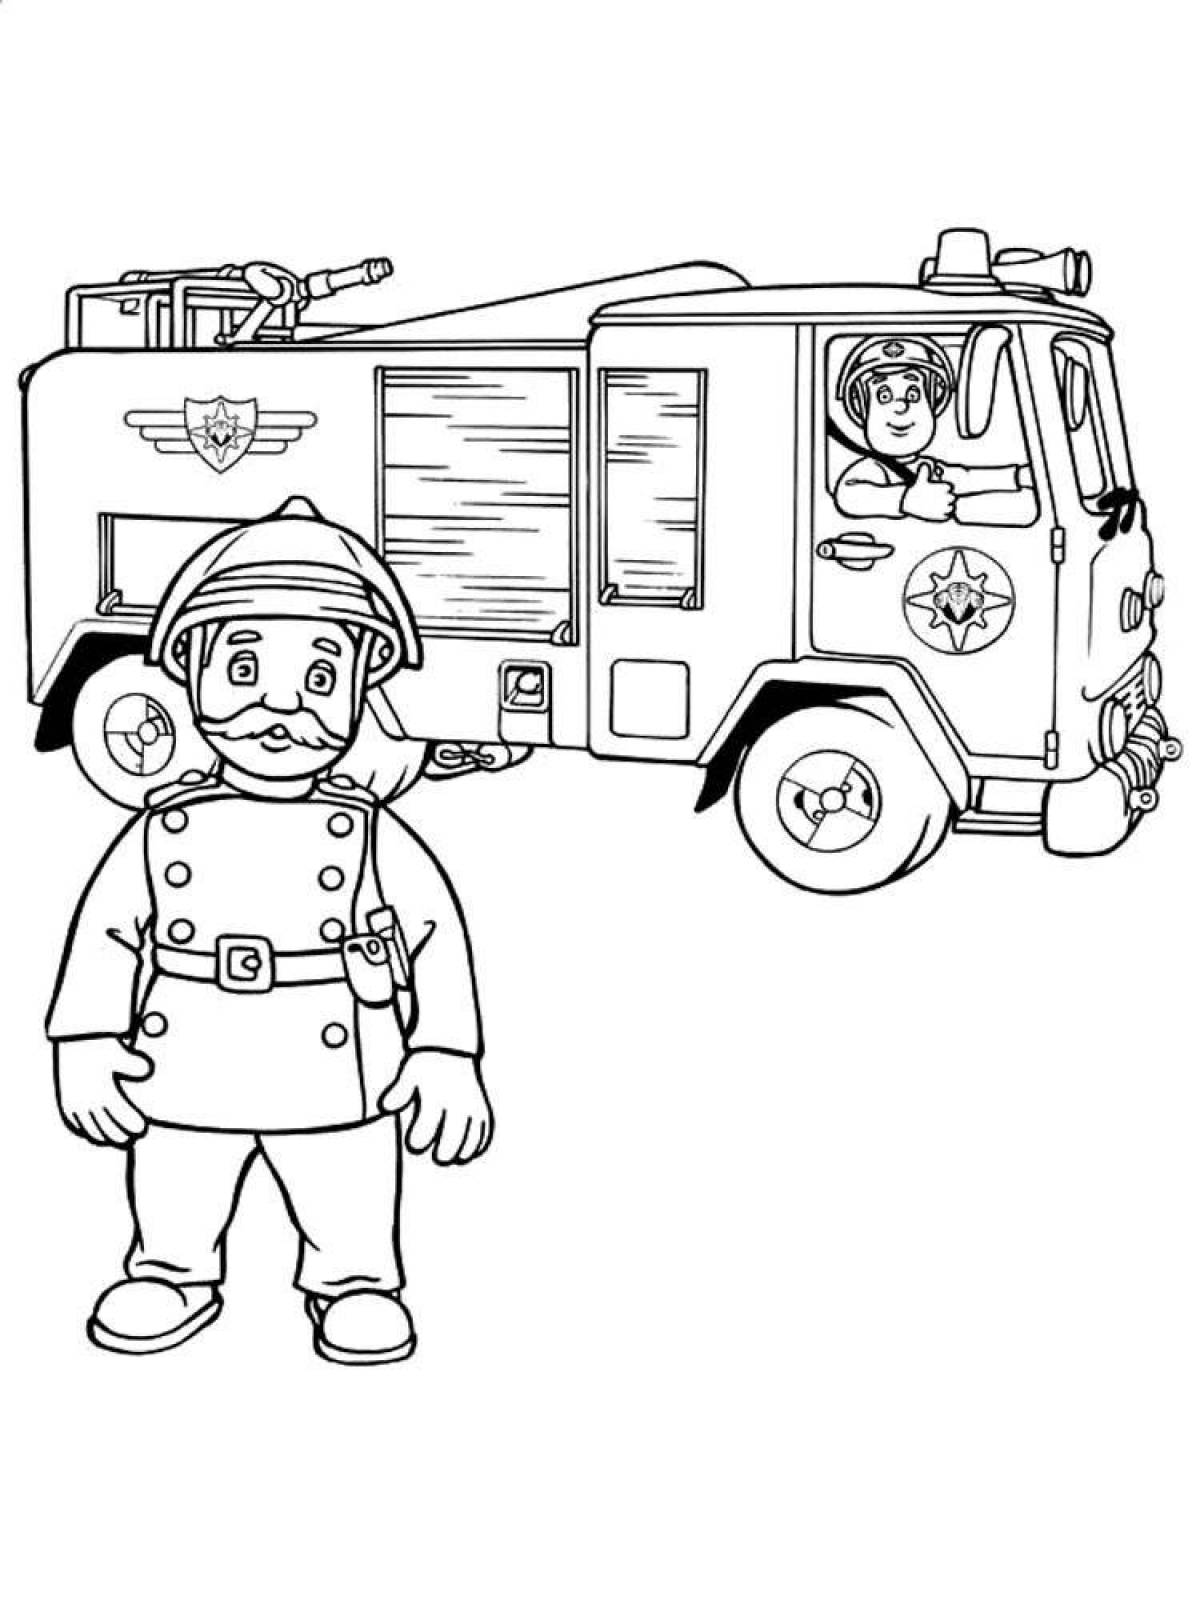 Heroic firefighter coloring page